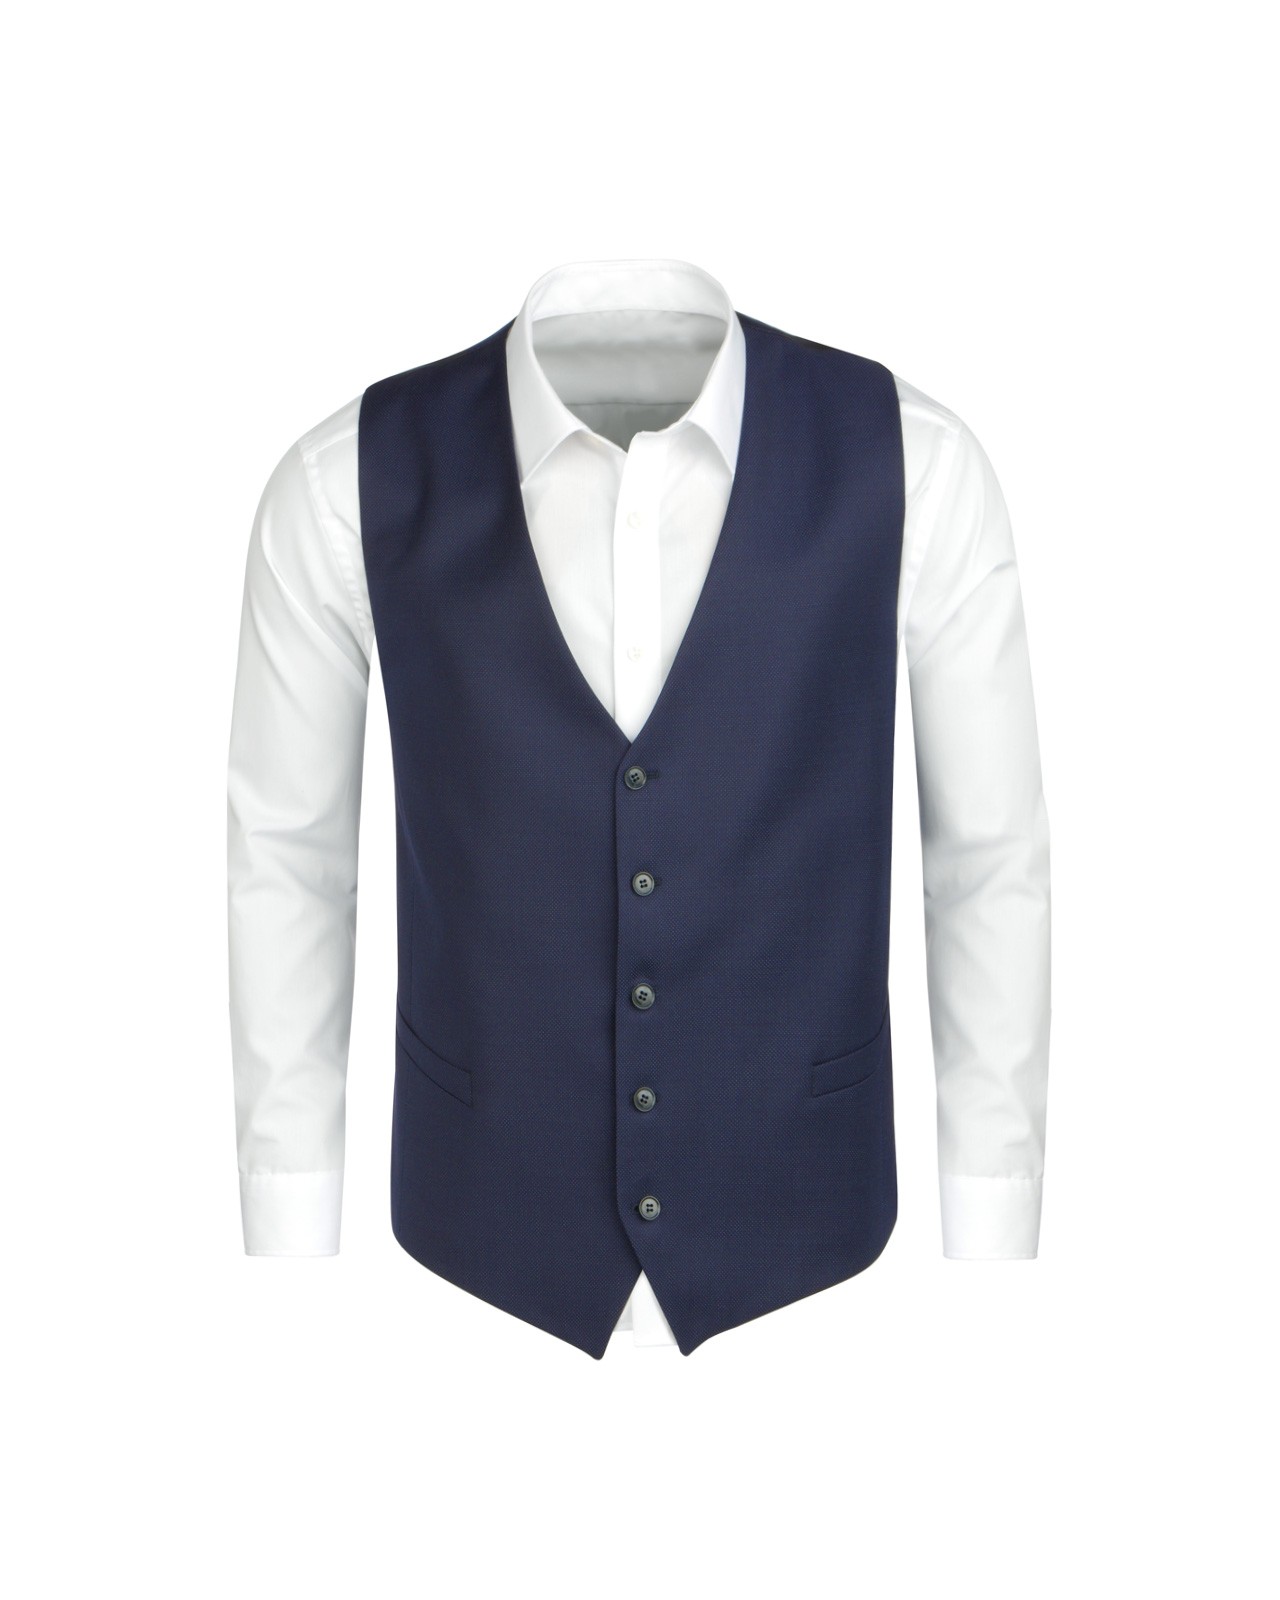 gilet costume grande taille homme